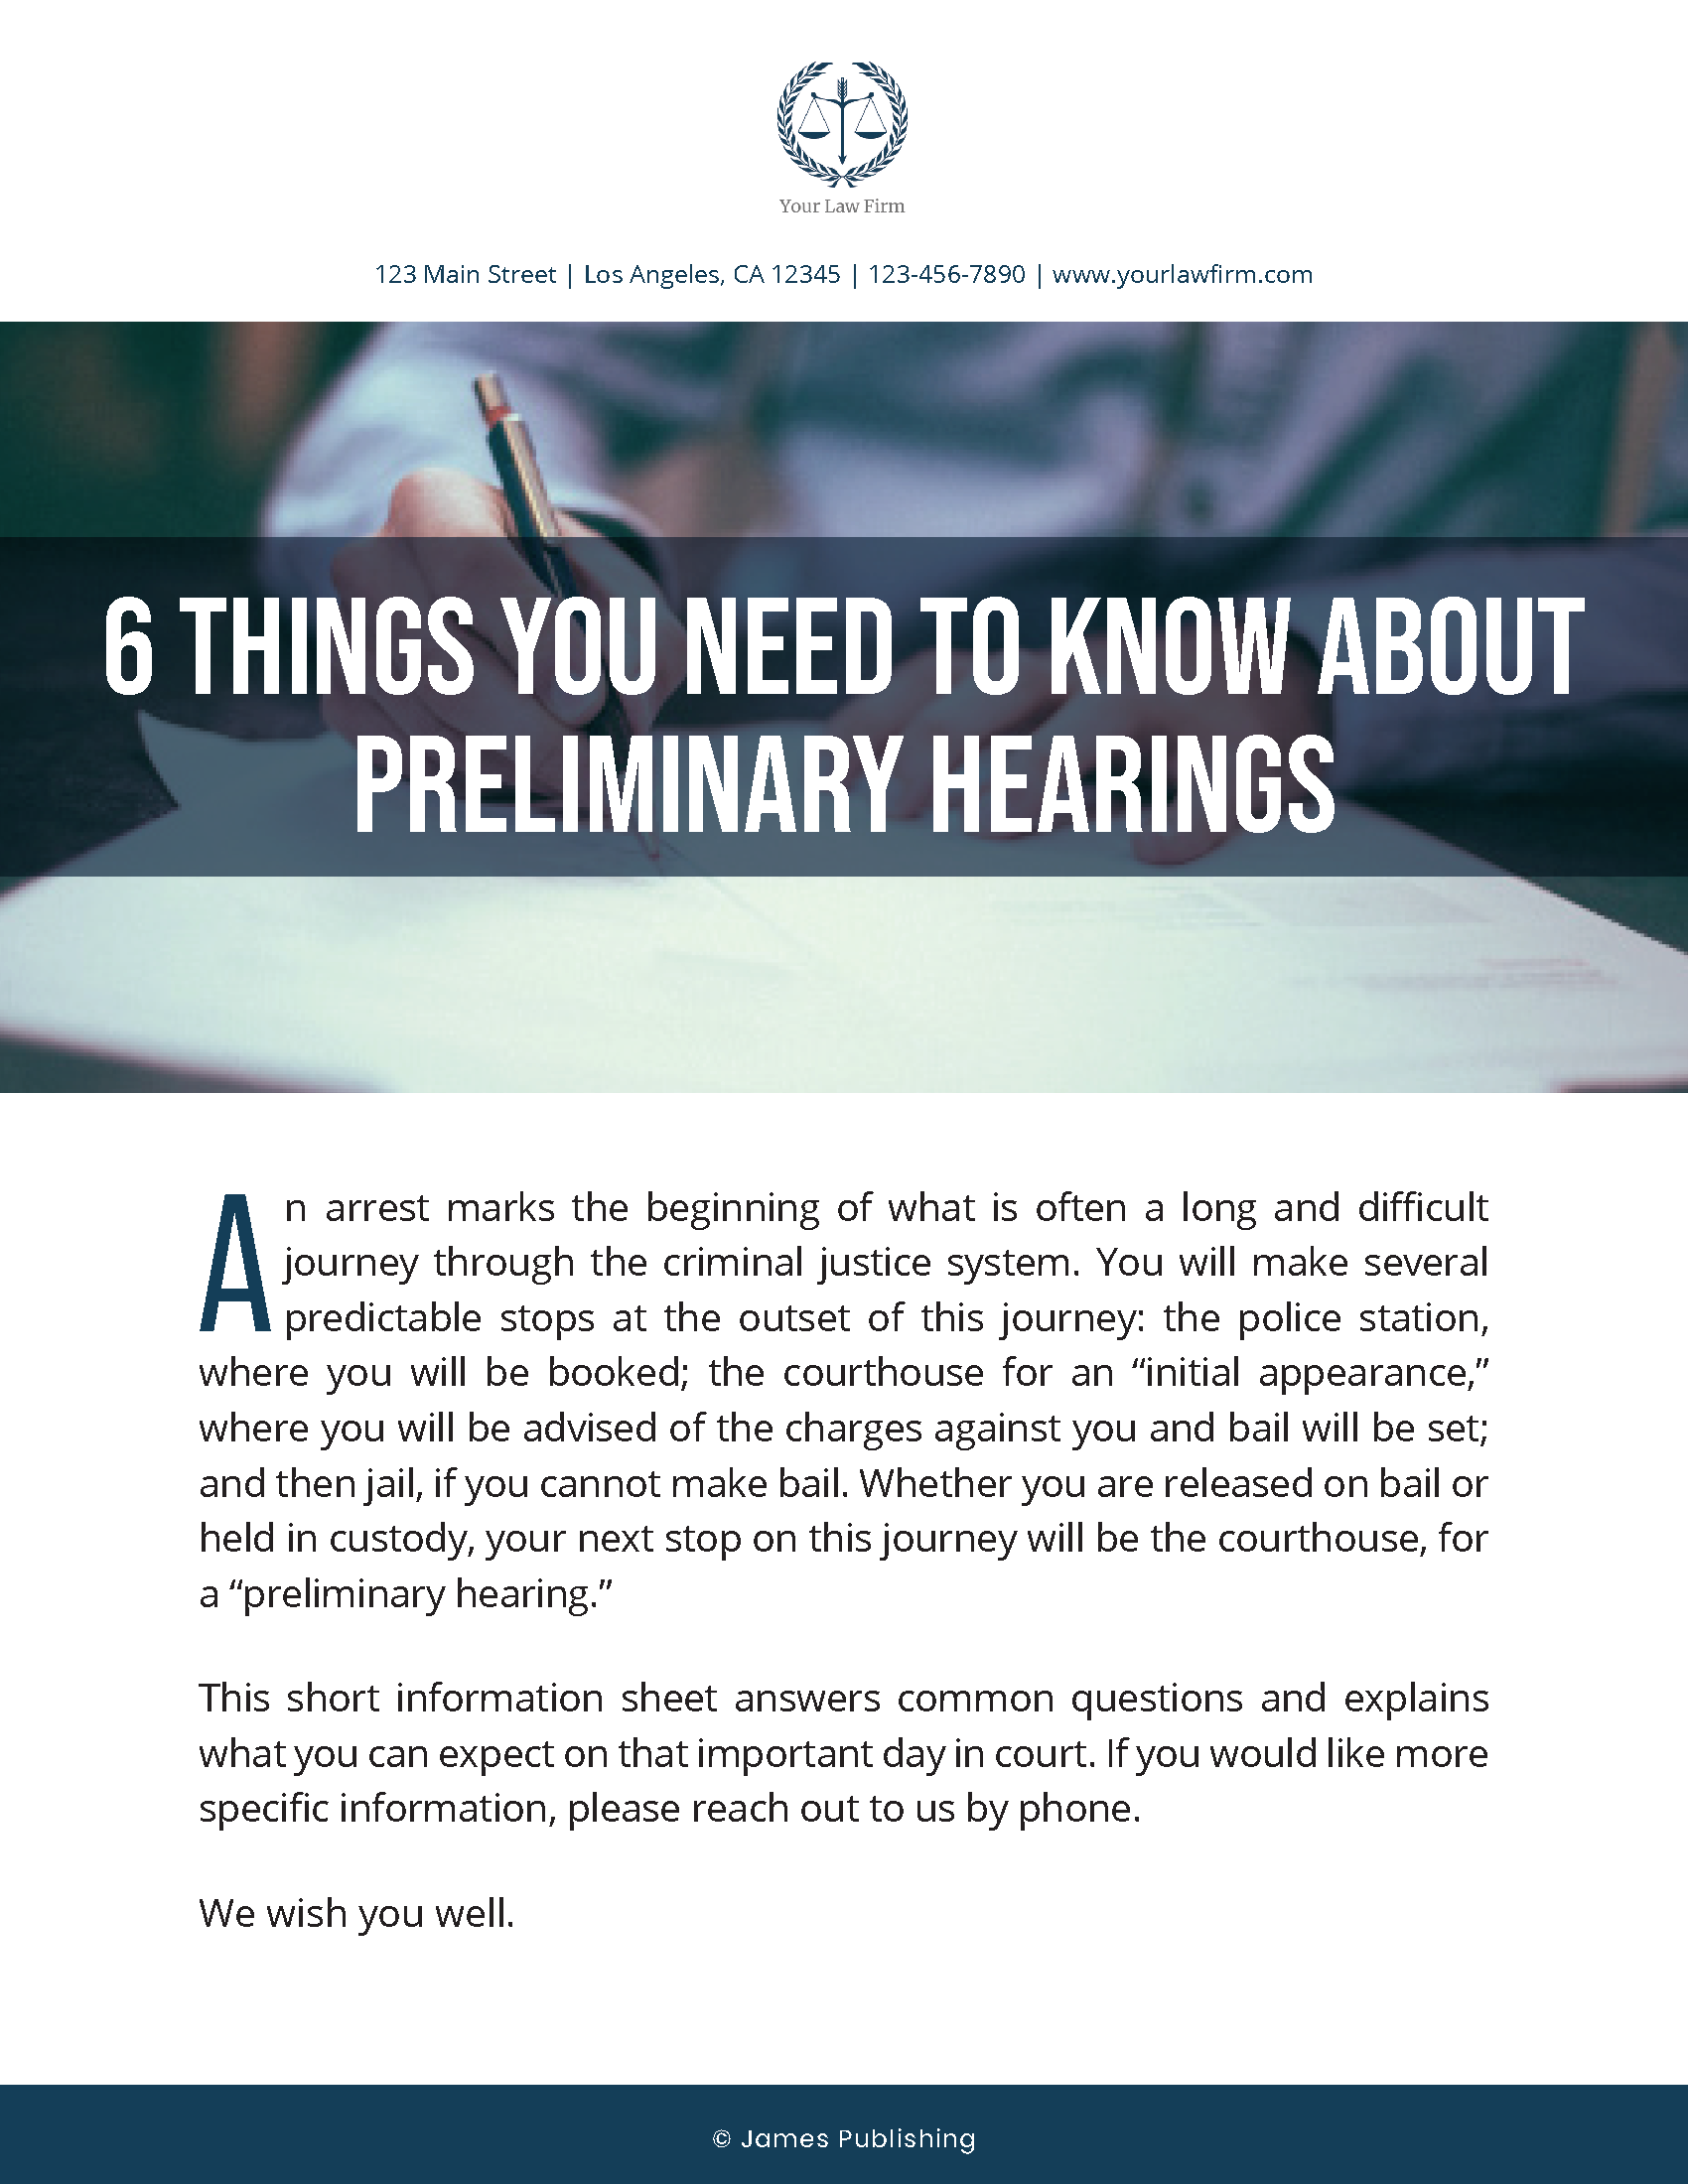 CRIM-08 6 Things You Need to Know About Preliminary Hearings